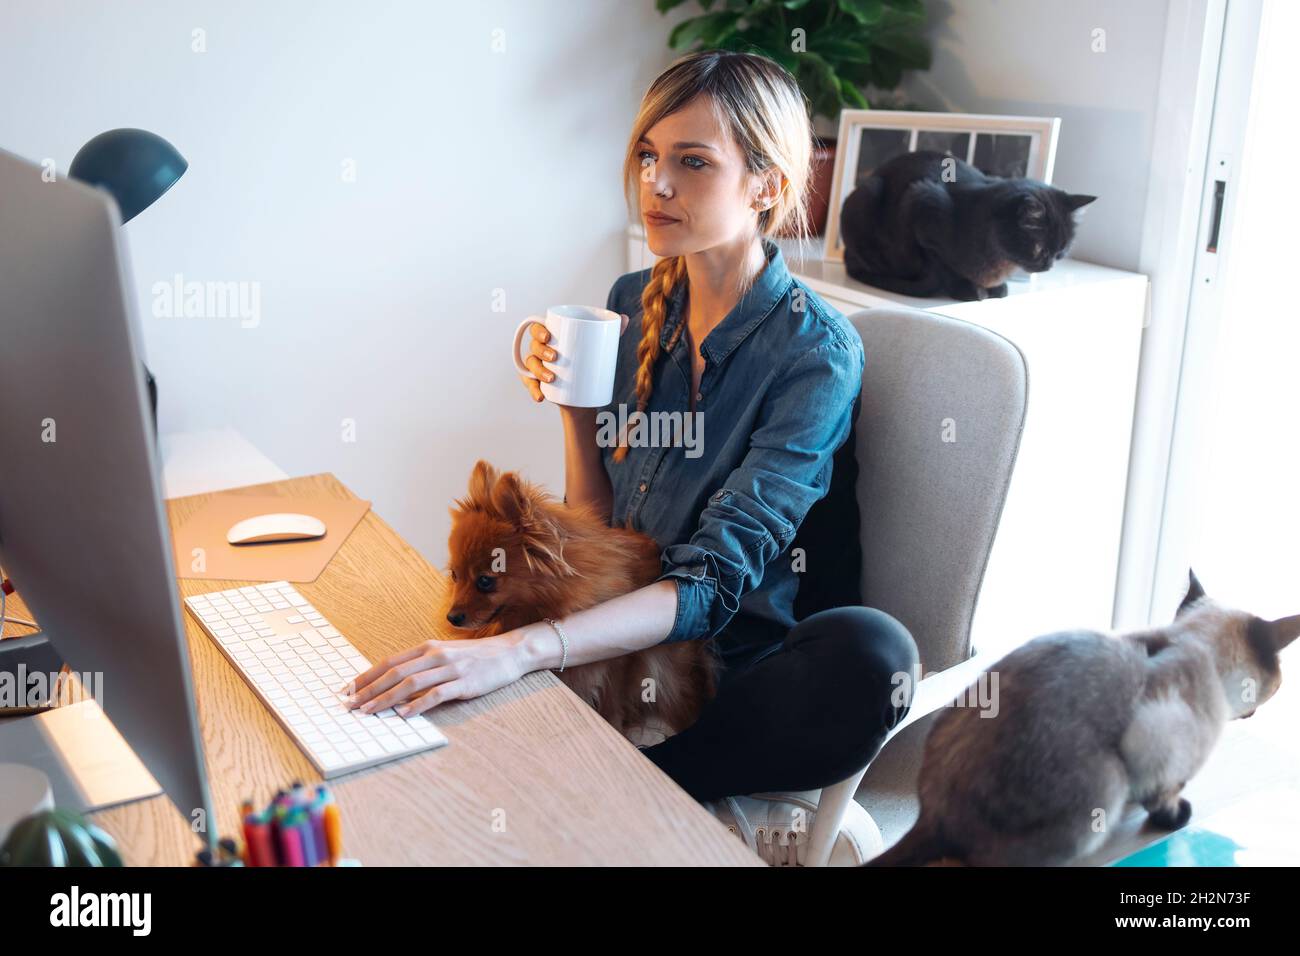 Female vlogger siting with dog using computer at home Stock Photo